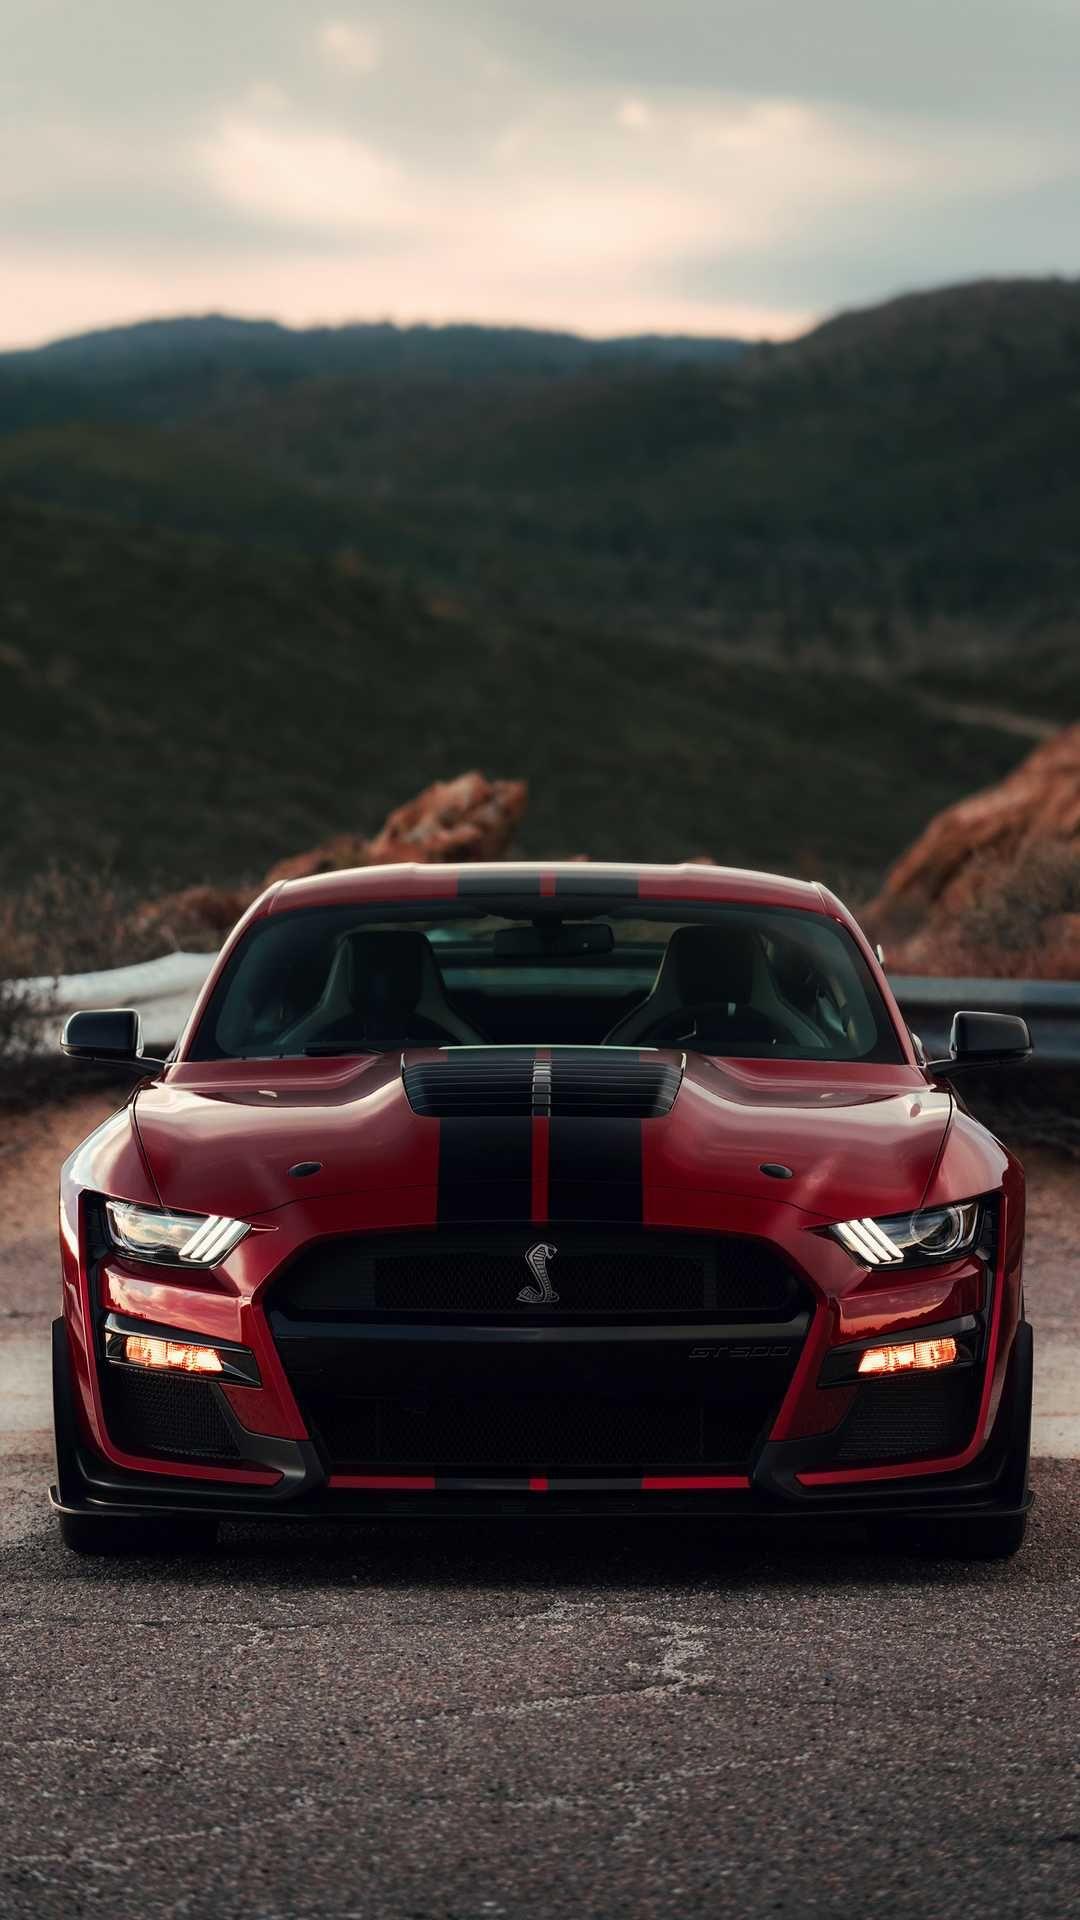 New, 2020 Ford Mustang Shelby GT500, red front view